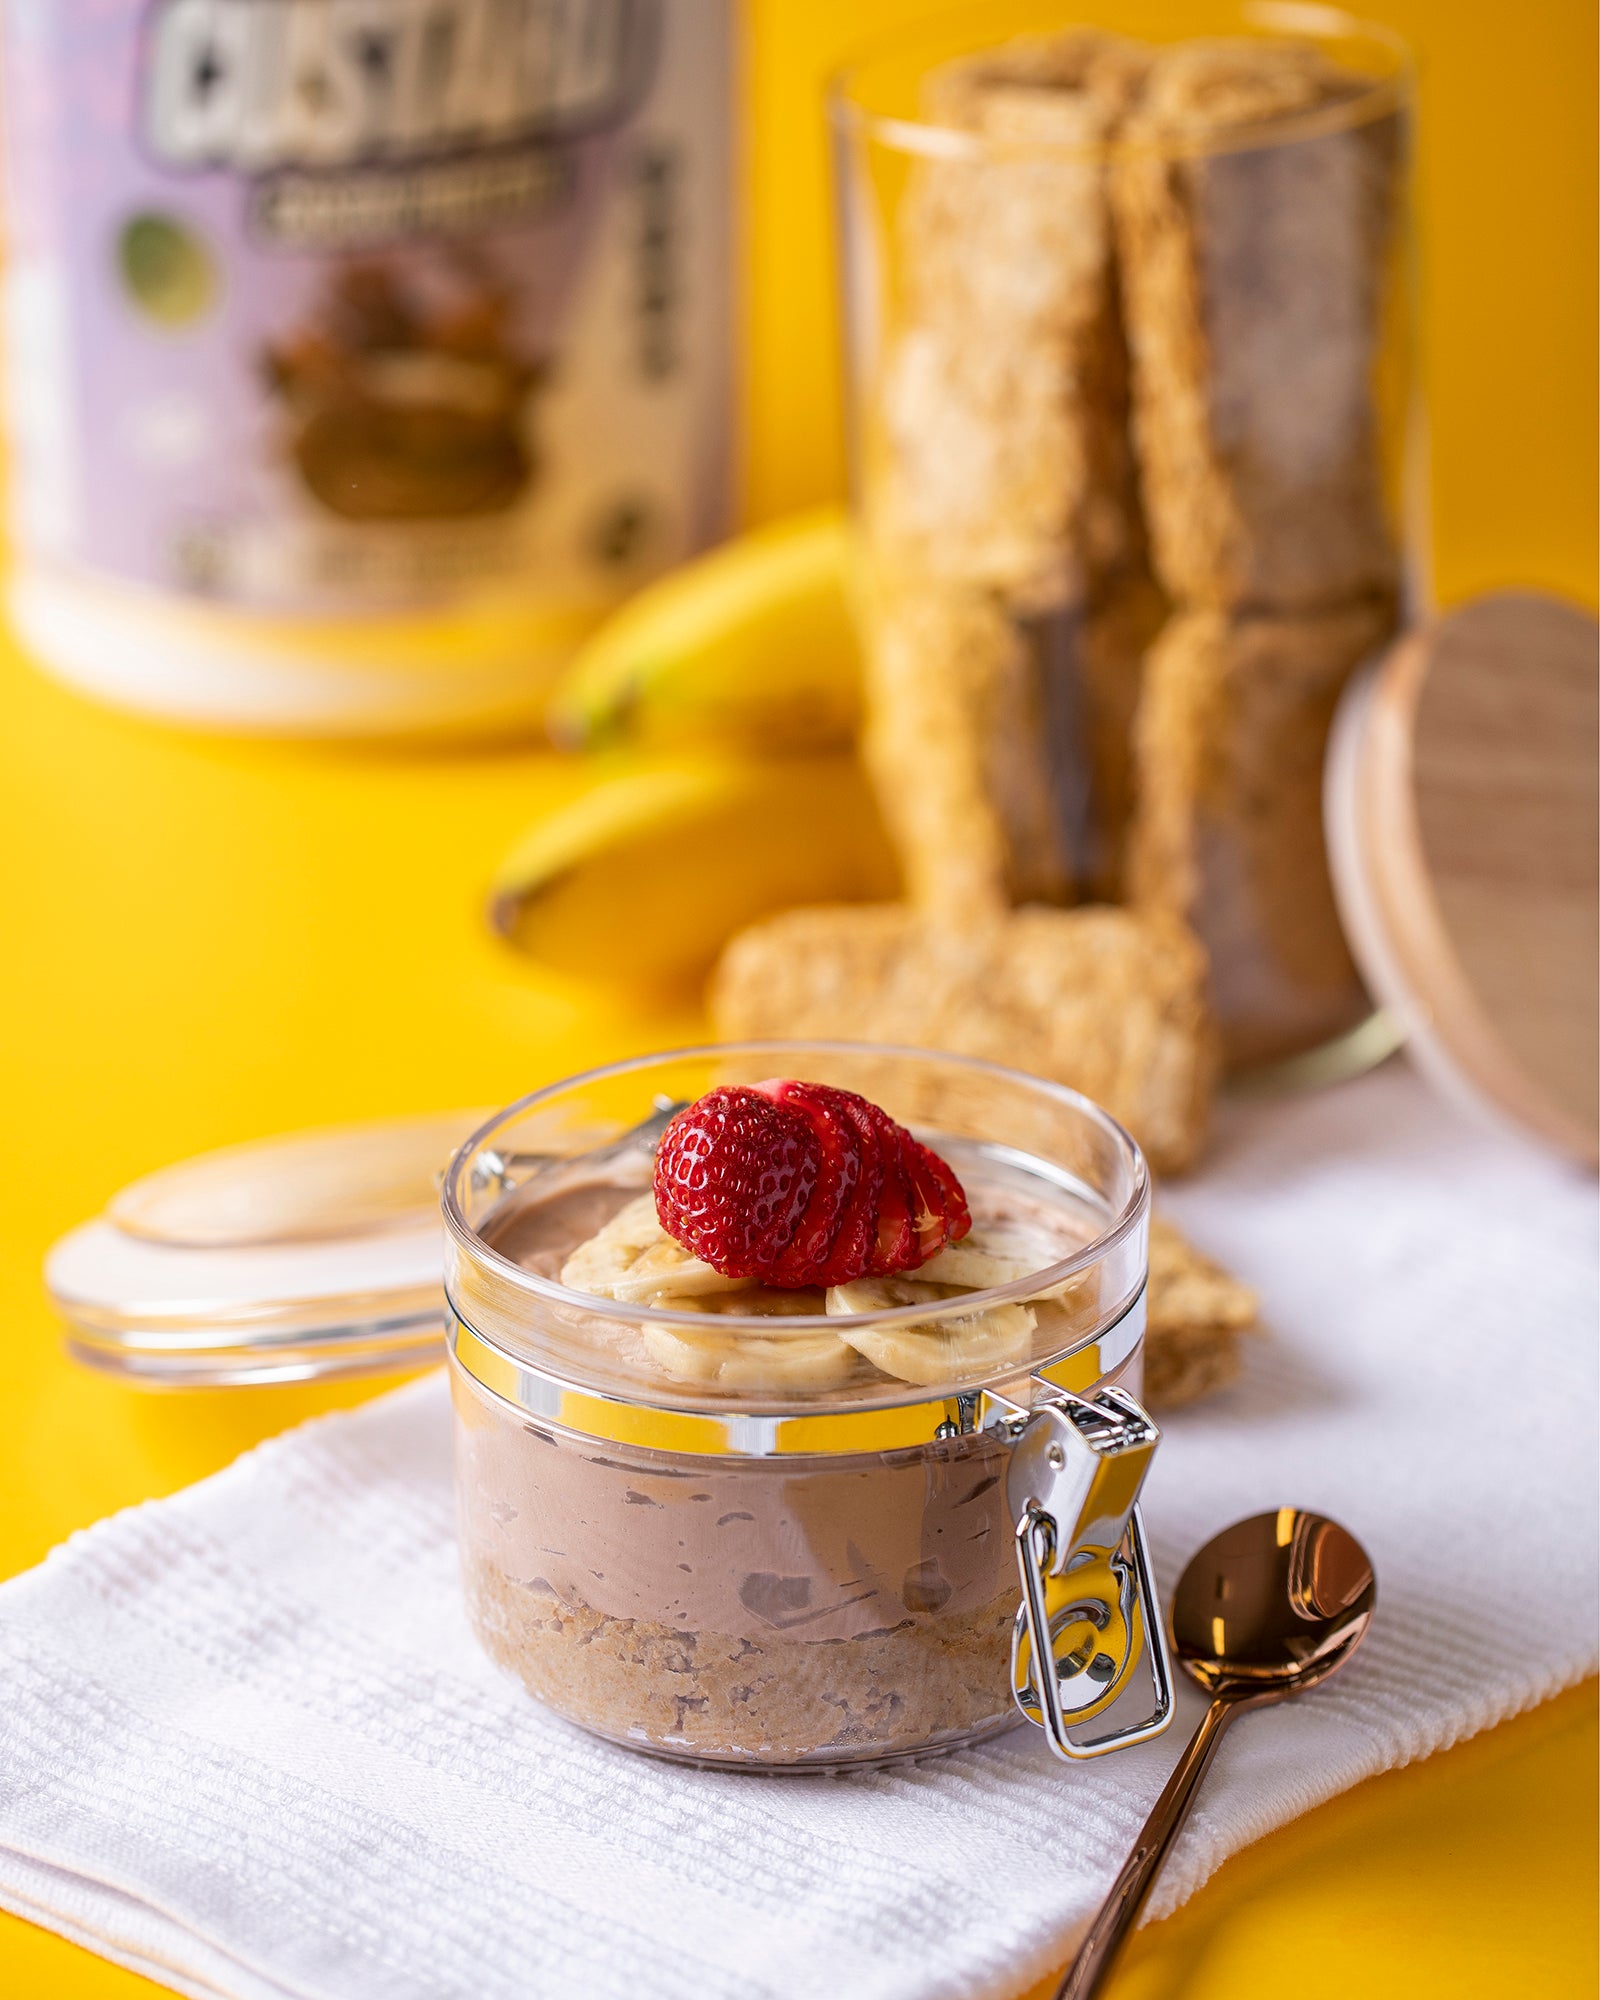 High Protein Weetabix Bowl Recipe: Supercharge Your Day! - Free Soul